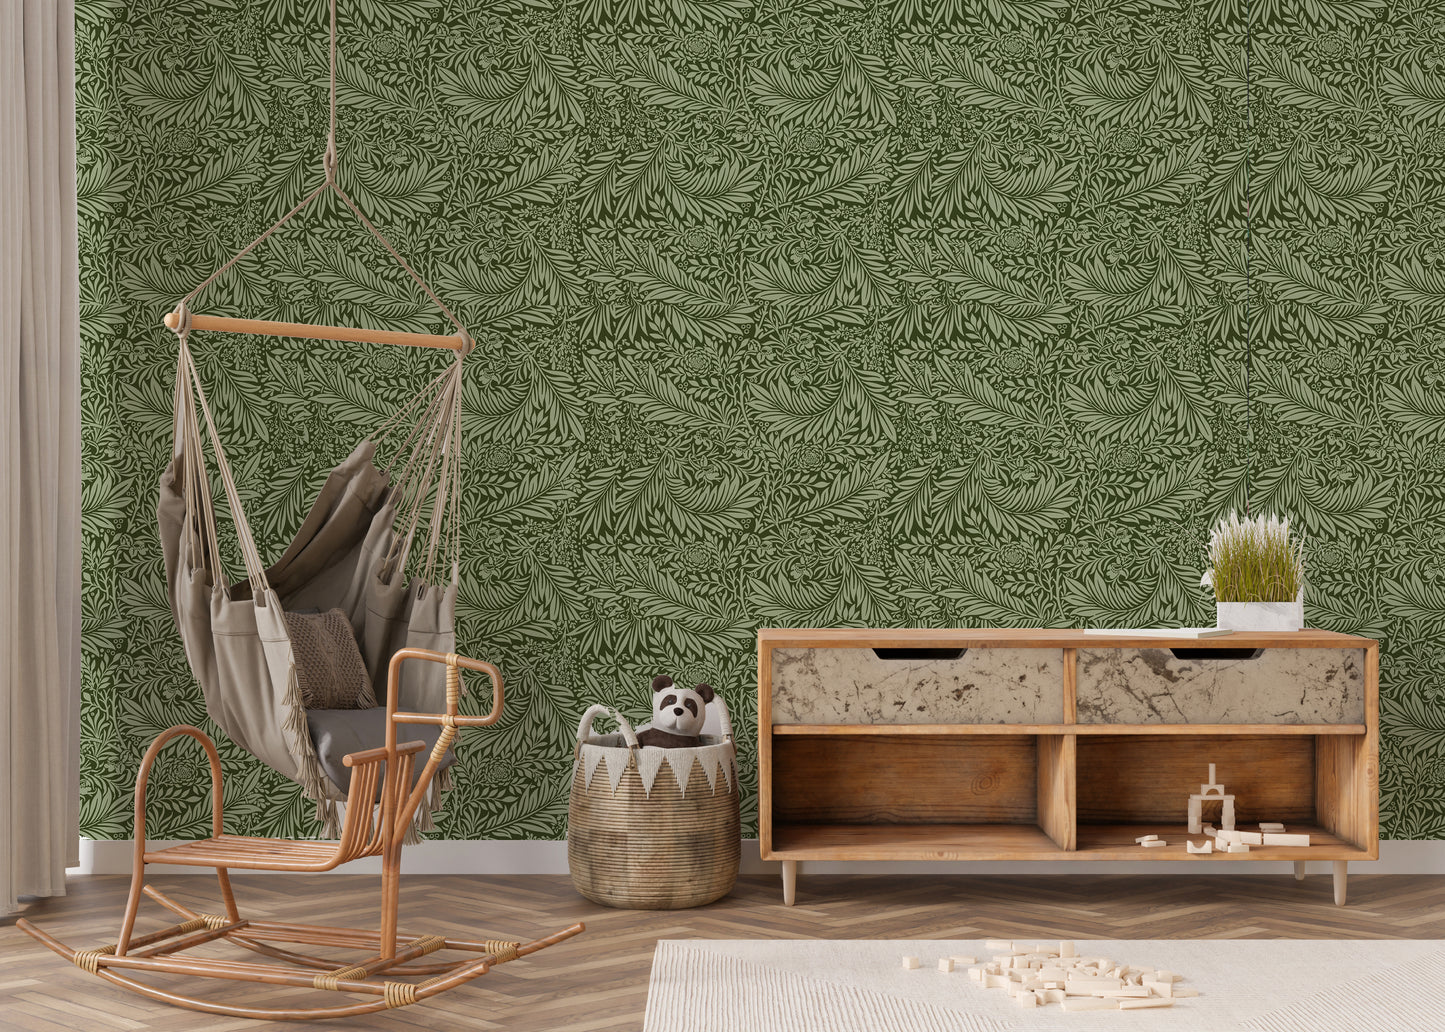 green vintage fern removable peel and stick wallpaper in playroom